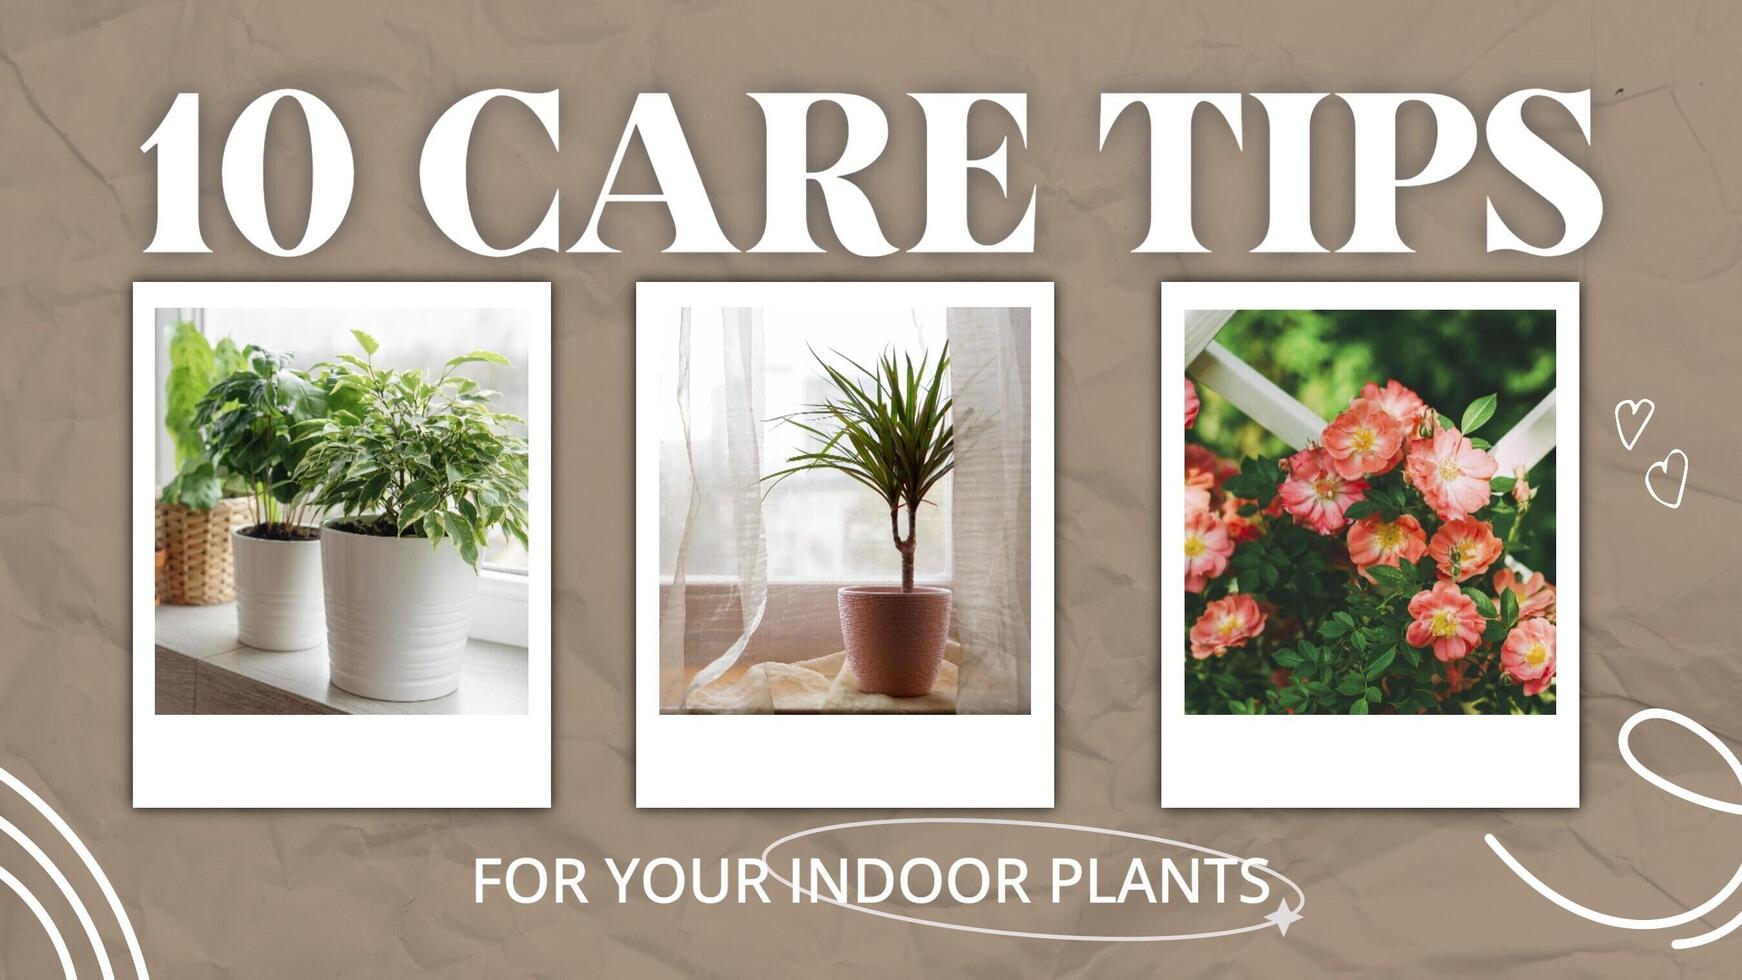 Plant Care Tips Youtube Thumbnail template